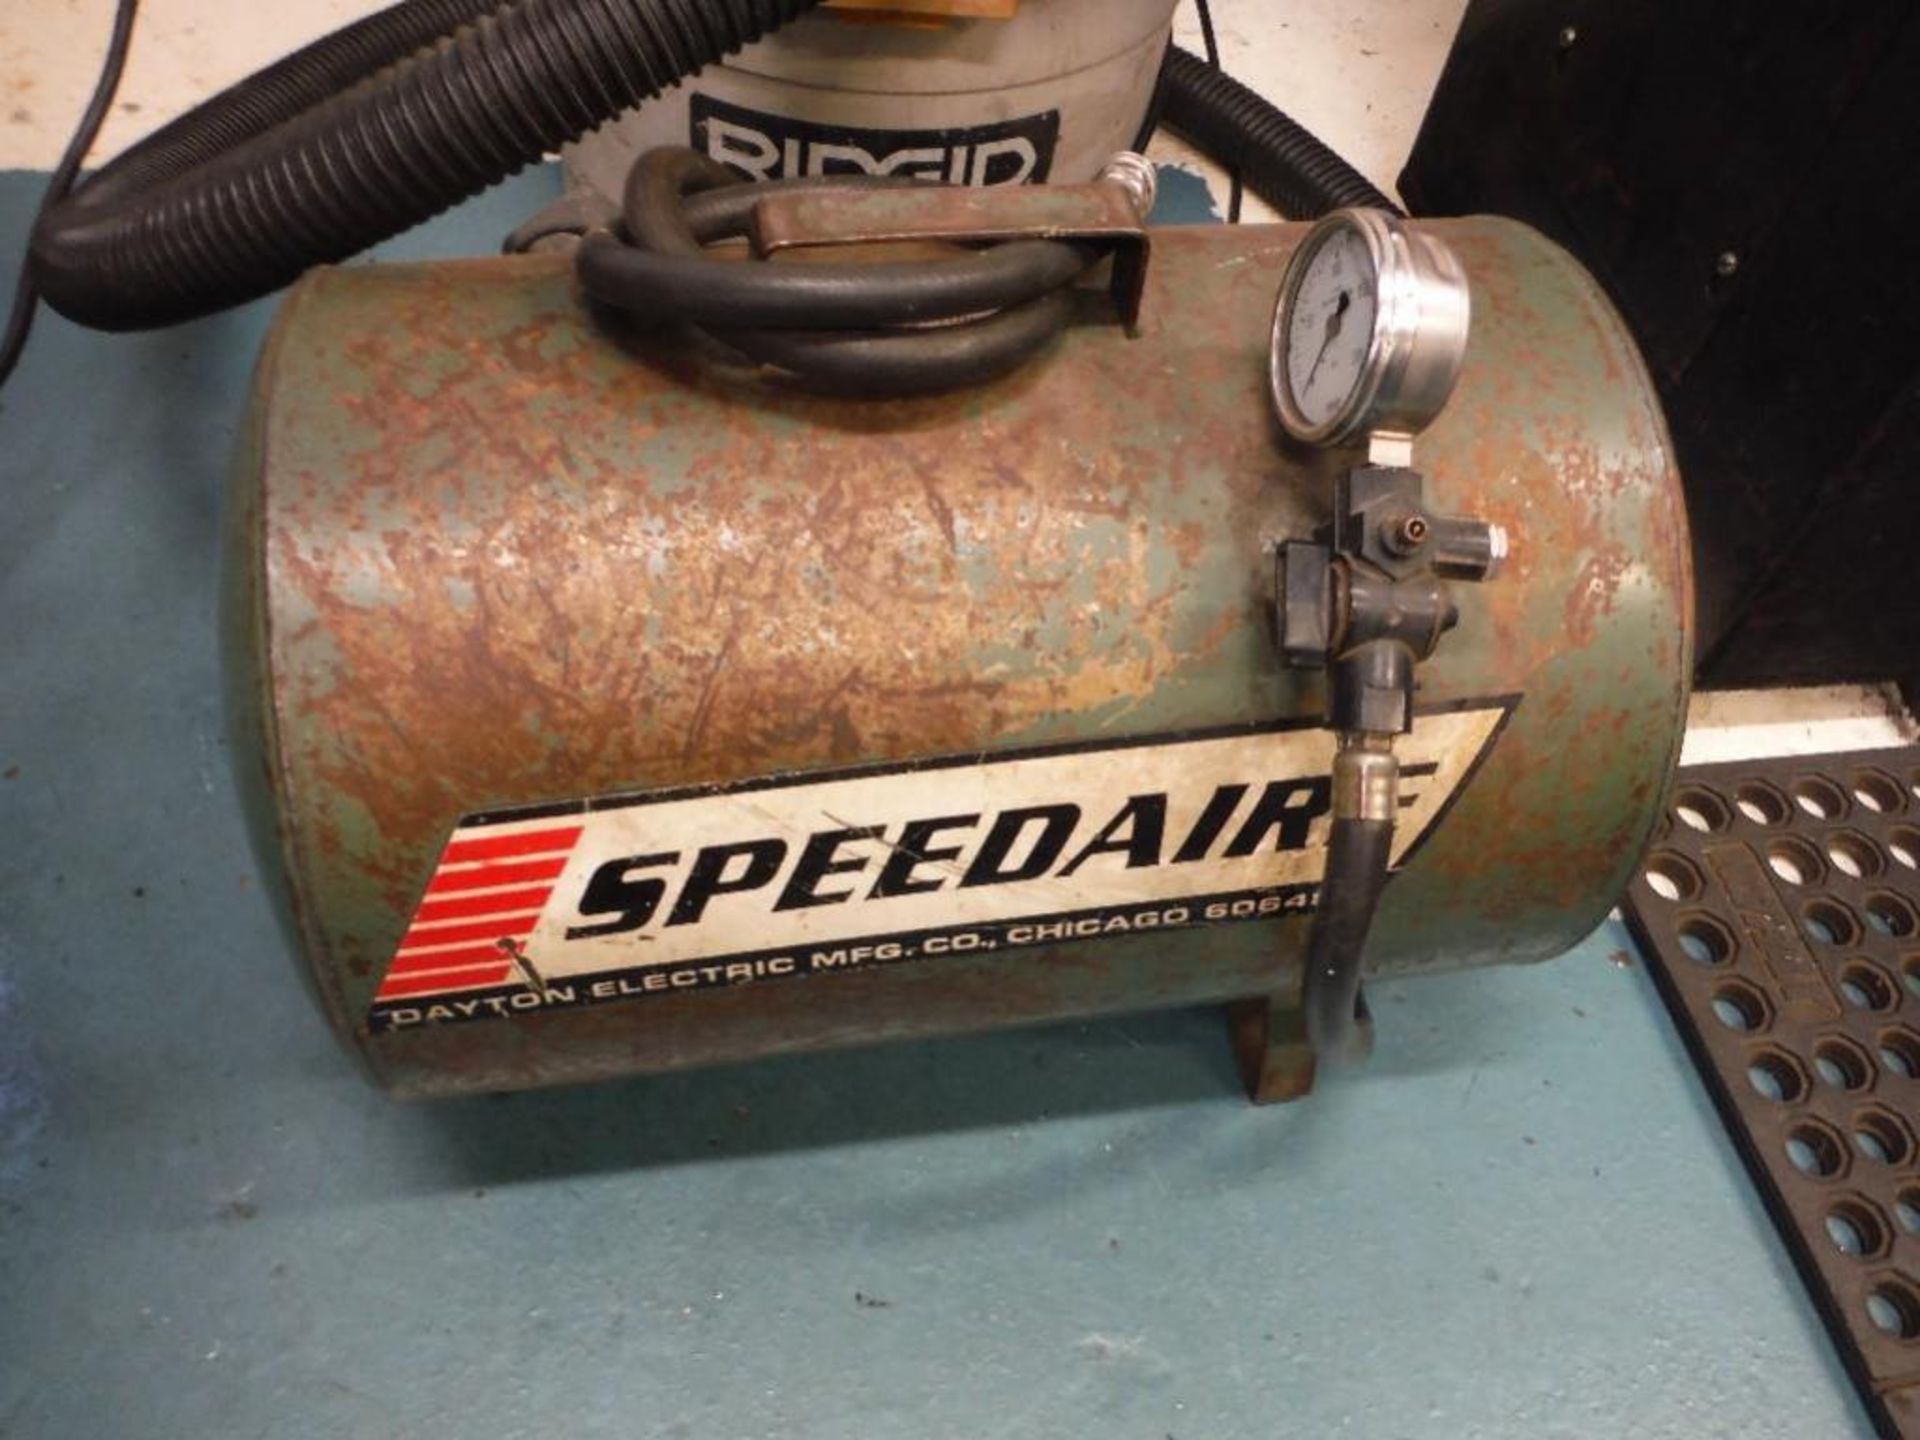 Rigid shop vac and speedaire portable air tank (lot). - RIGGING FEE FOR DOMESTIC TRANSPORT $25 - Image 2 of 3